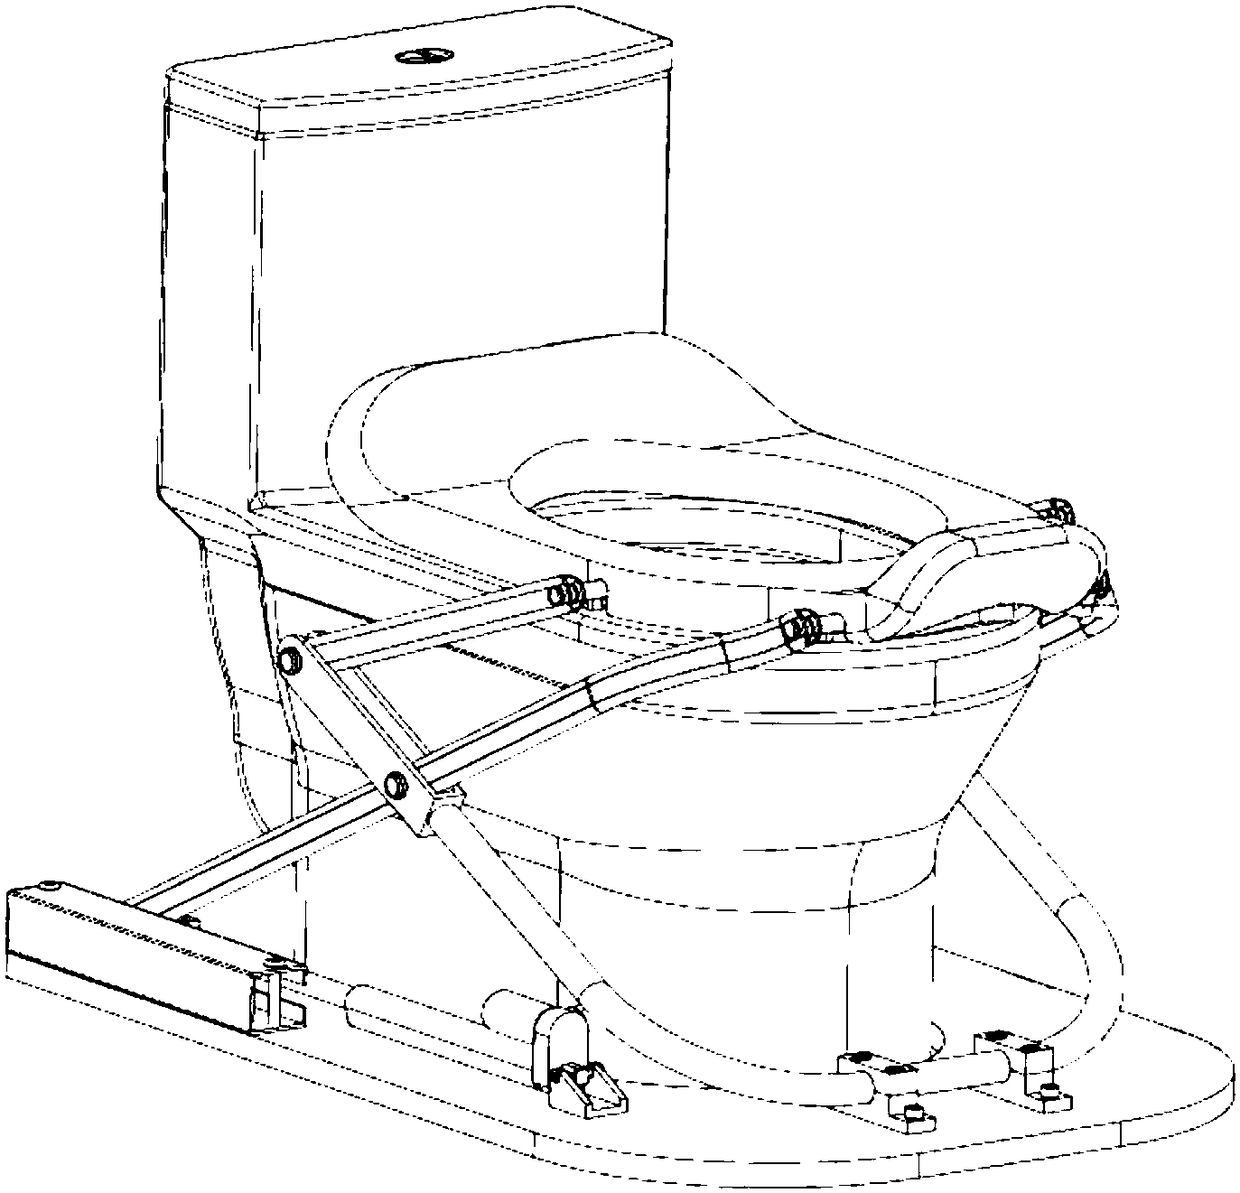 A toilet lifting auxiliary device